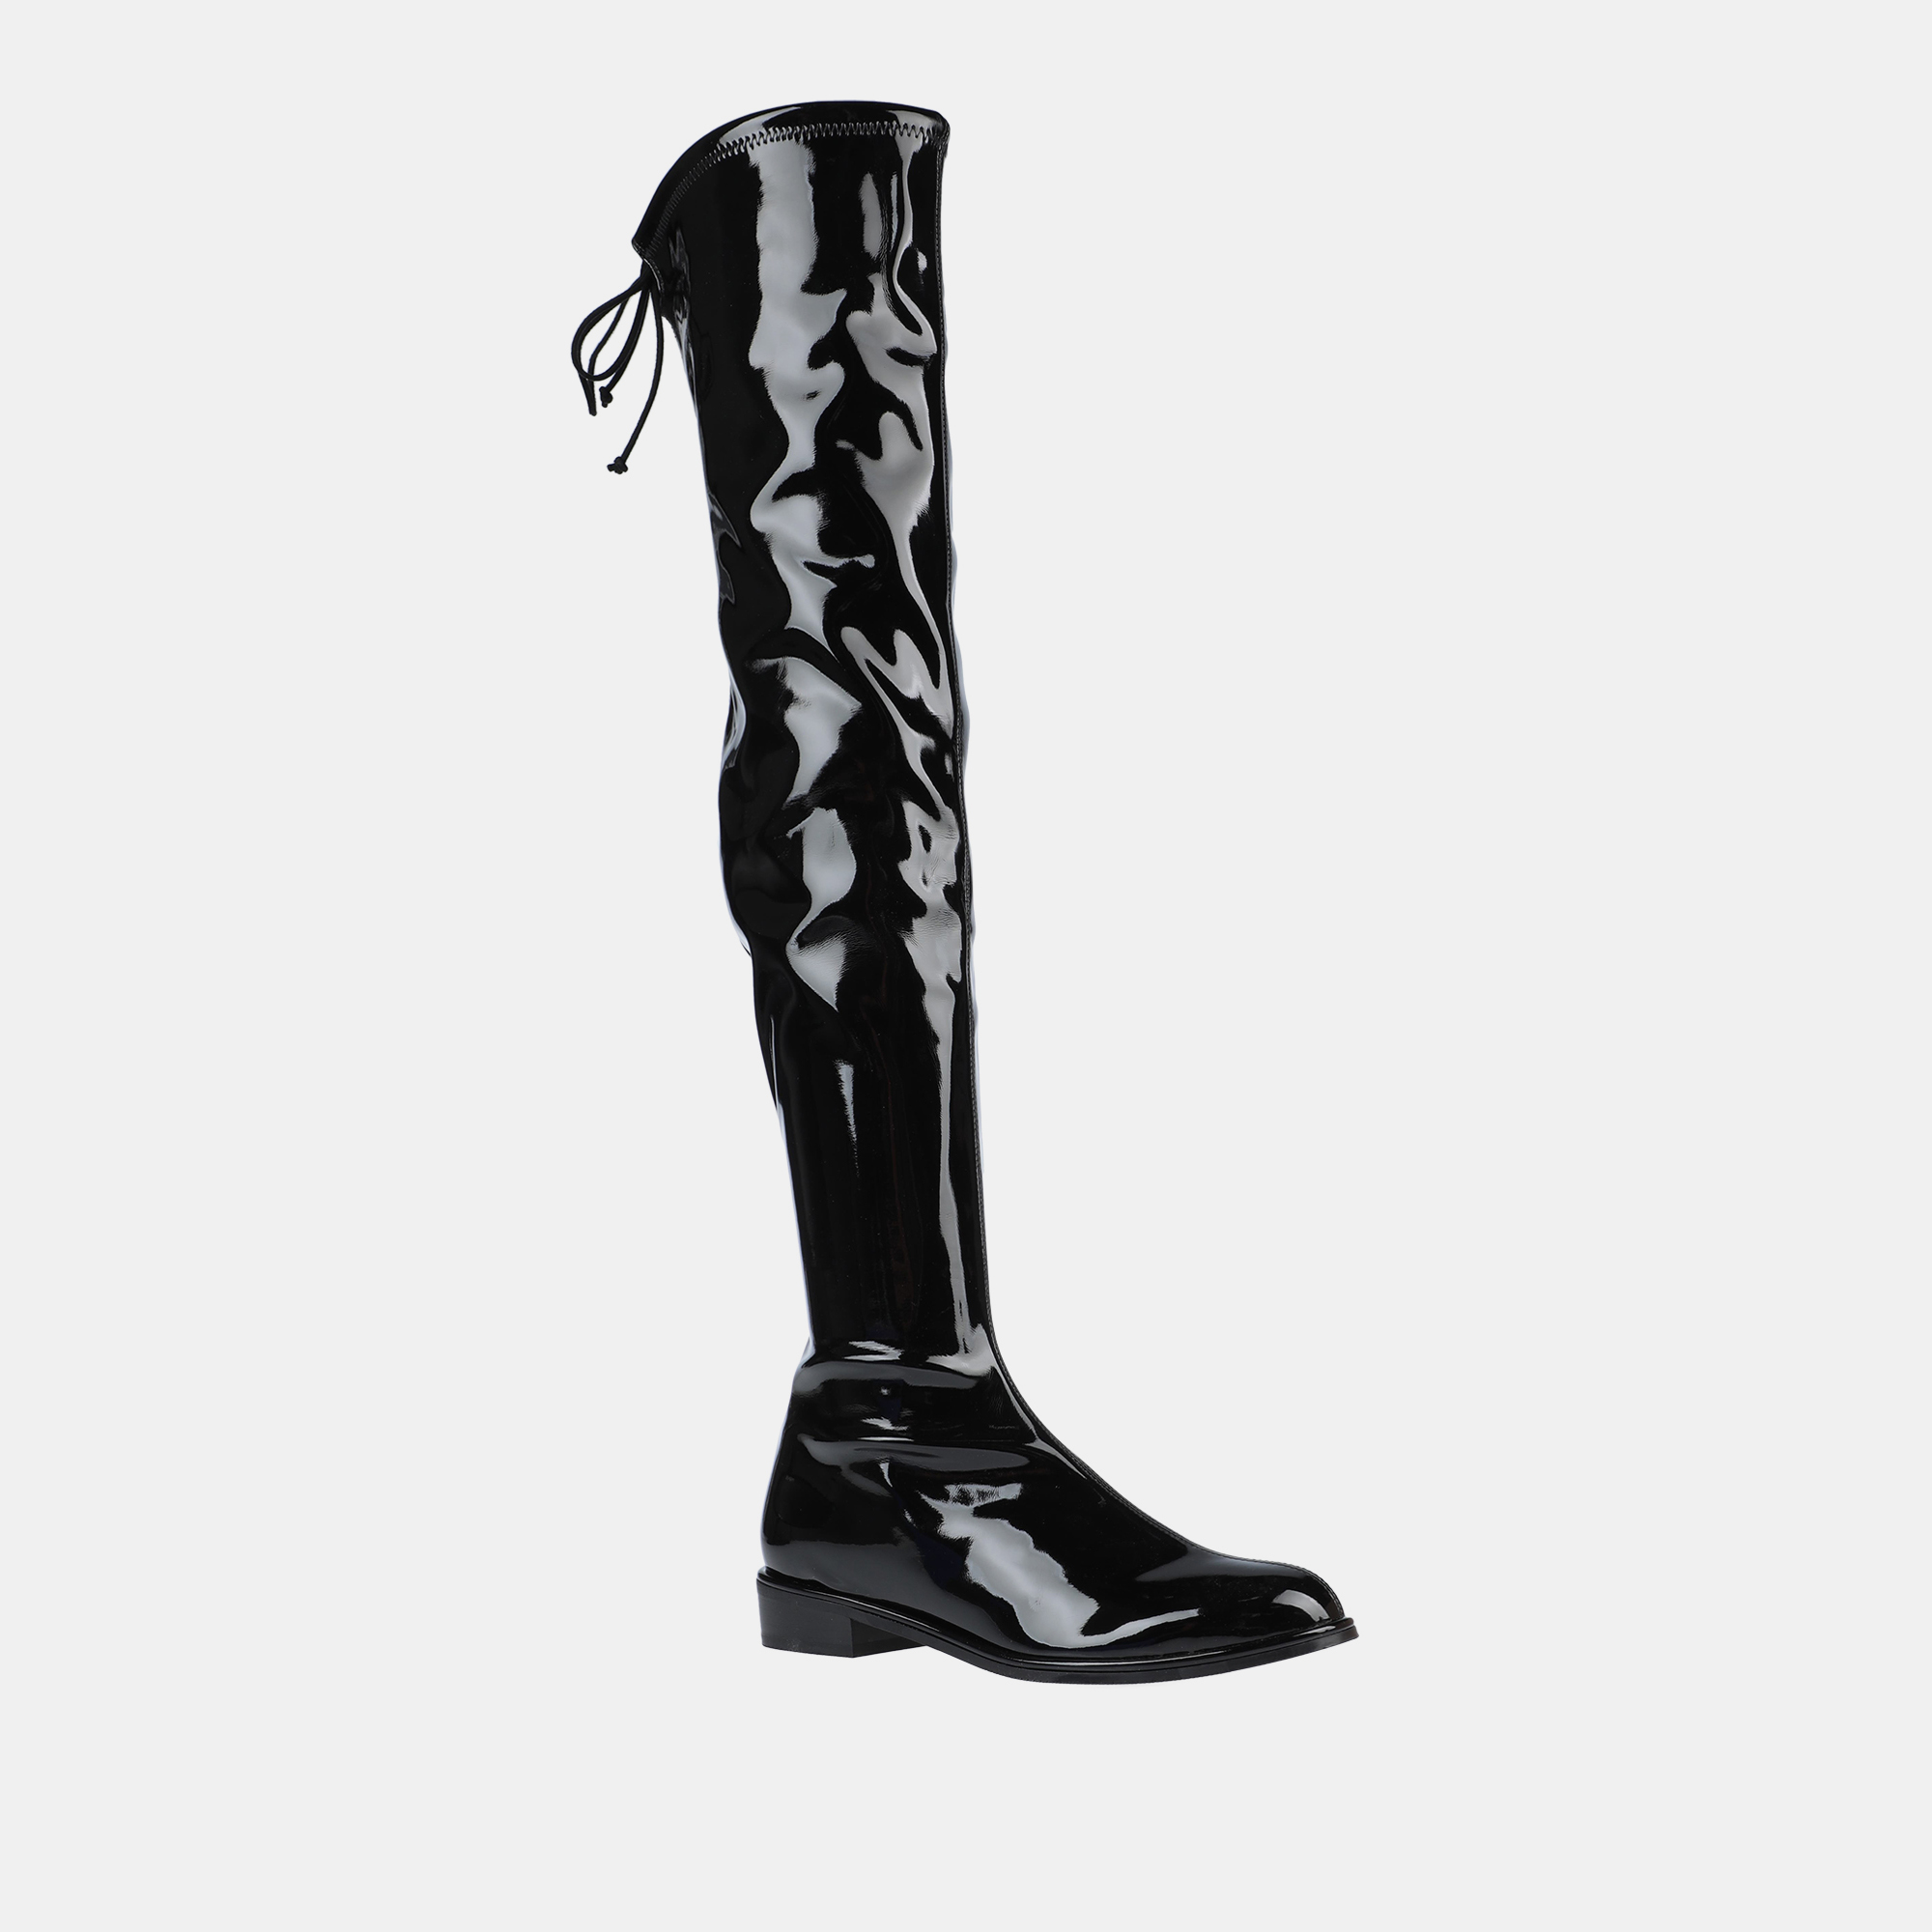 Stuart weitzman patent leather over the knee boots size 37